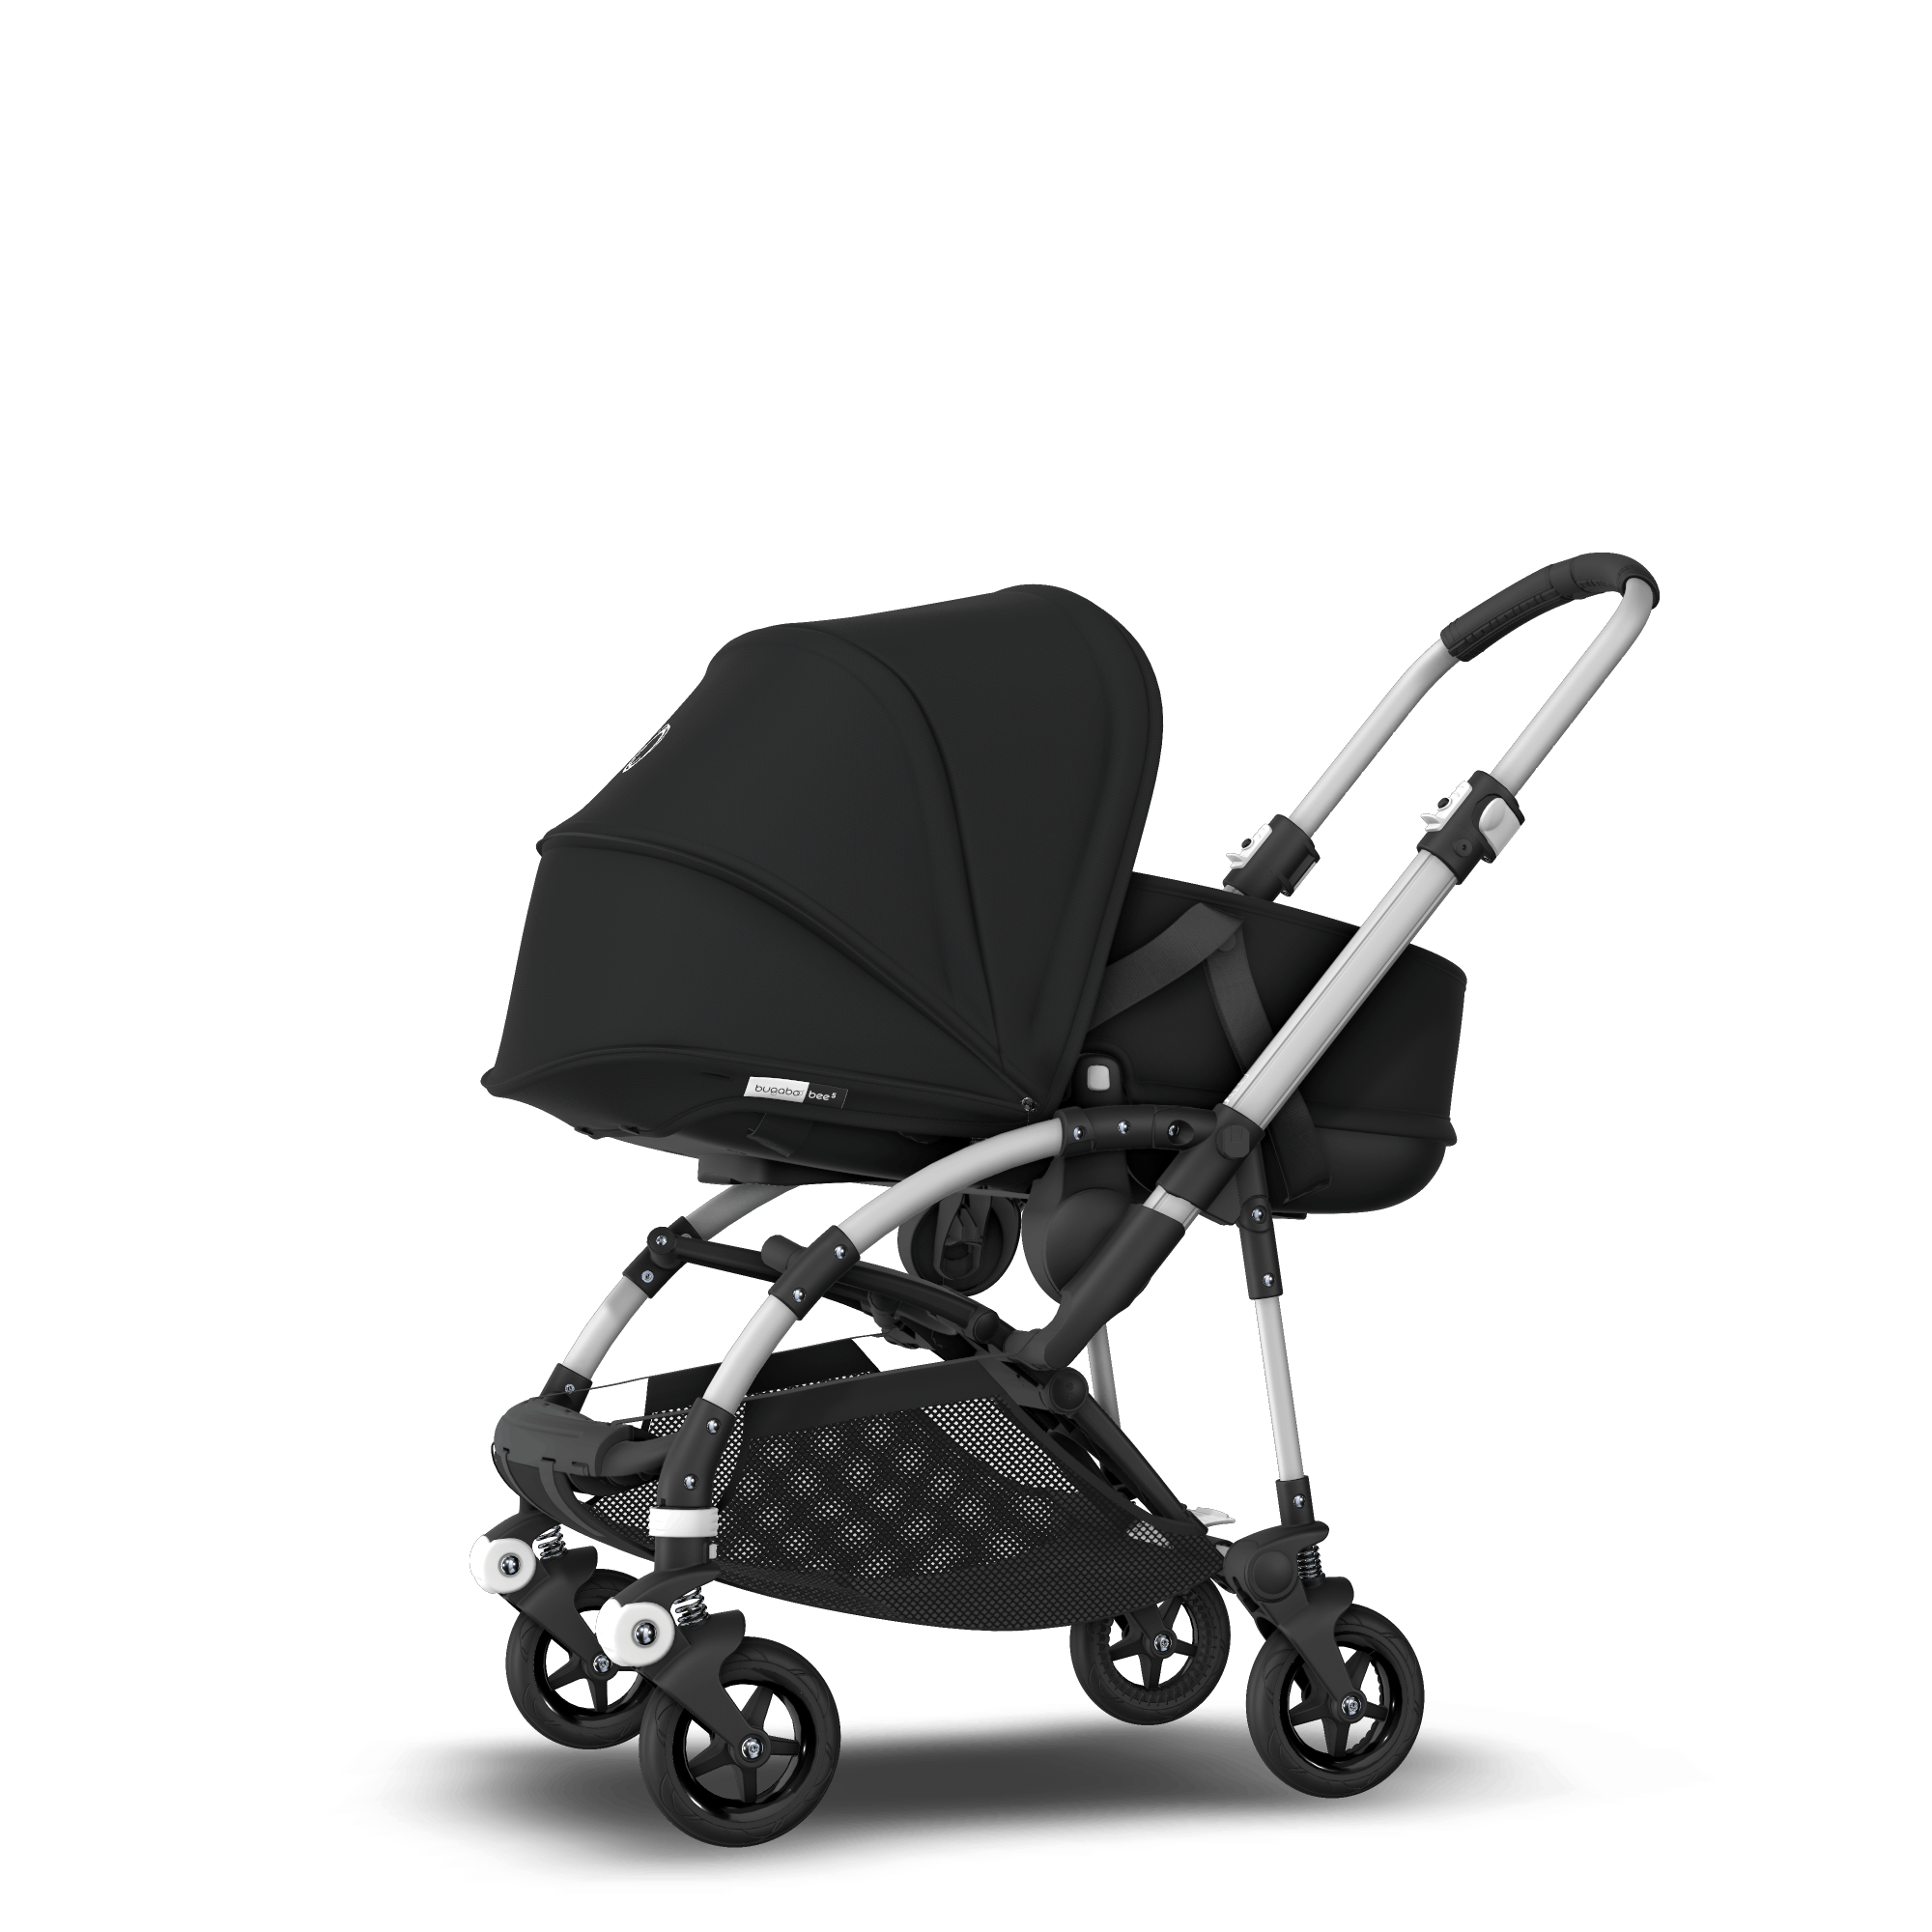 Bugaboo Bee 5 seat and bassinet stroller | Bugaboo